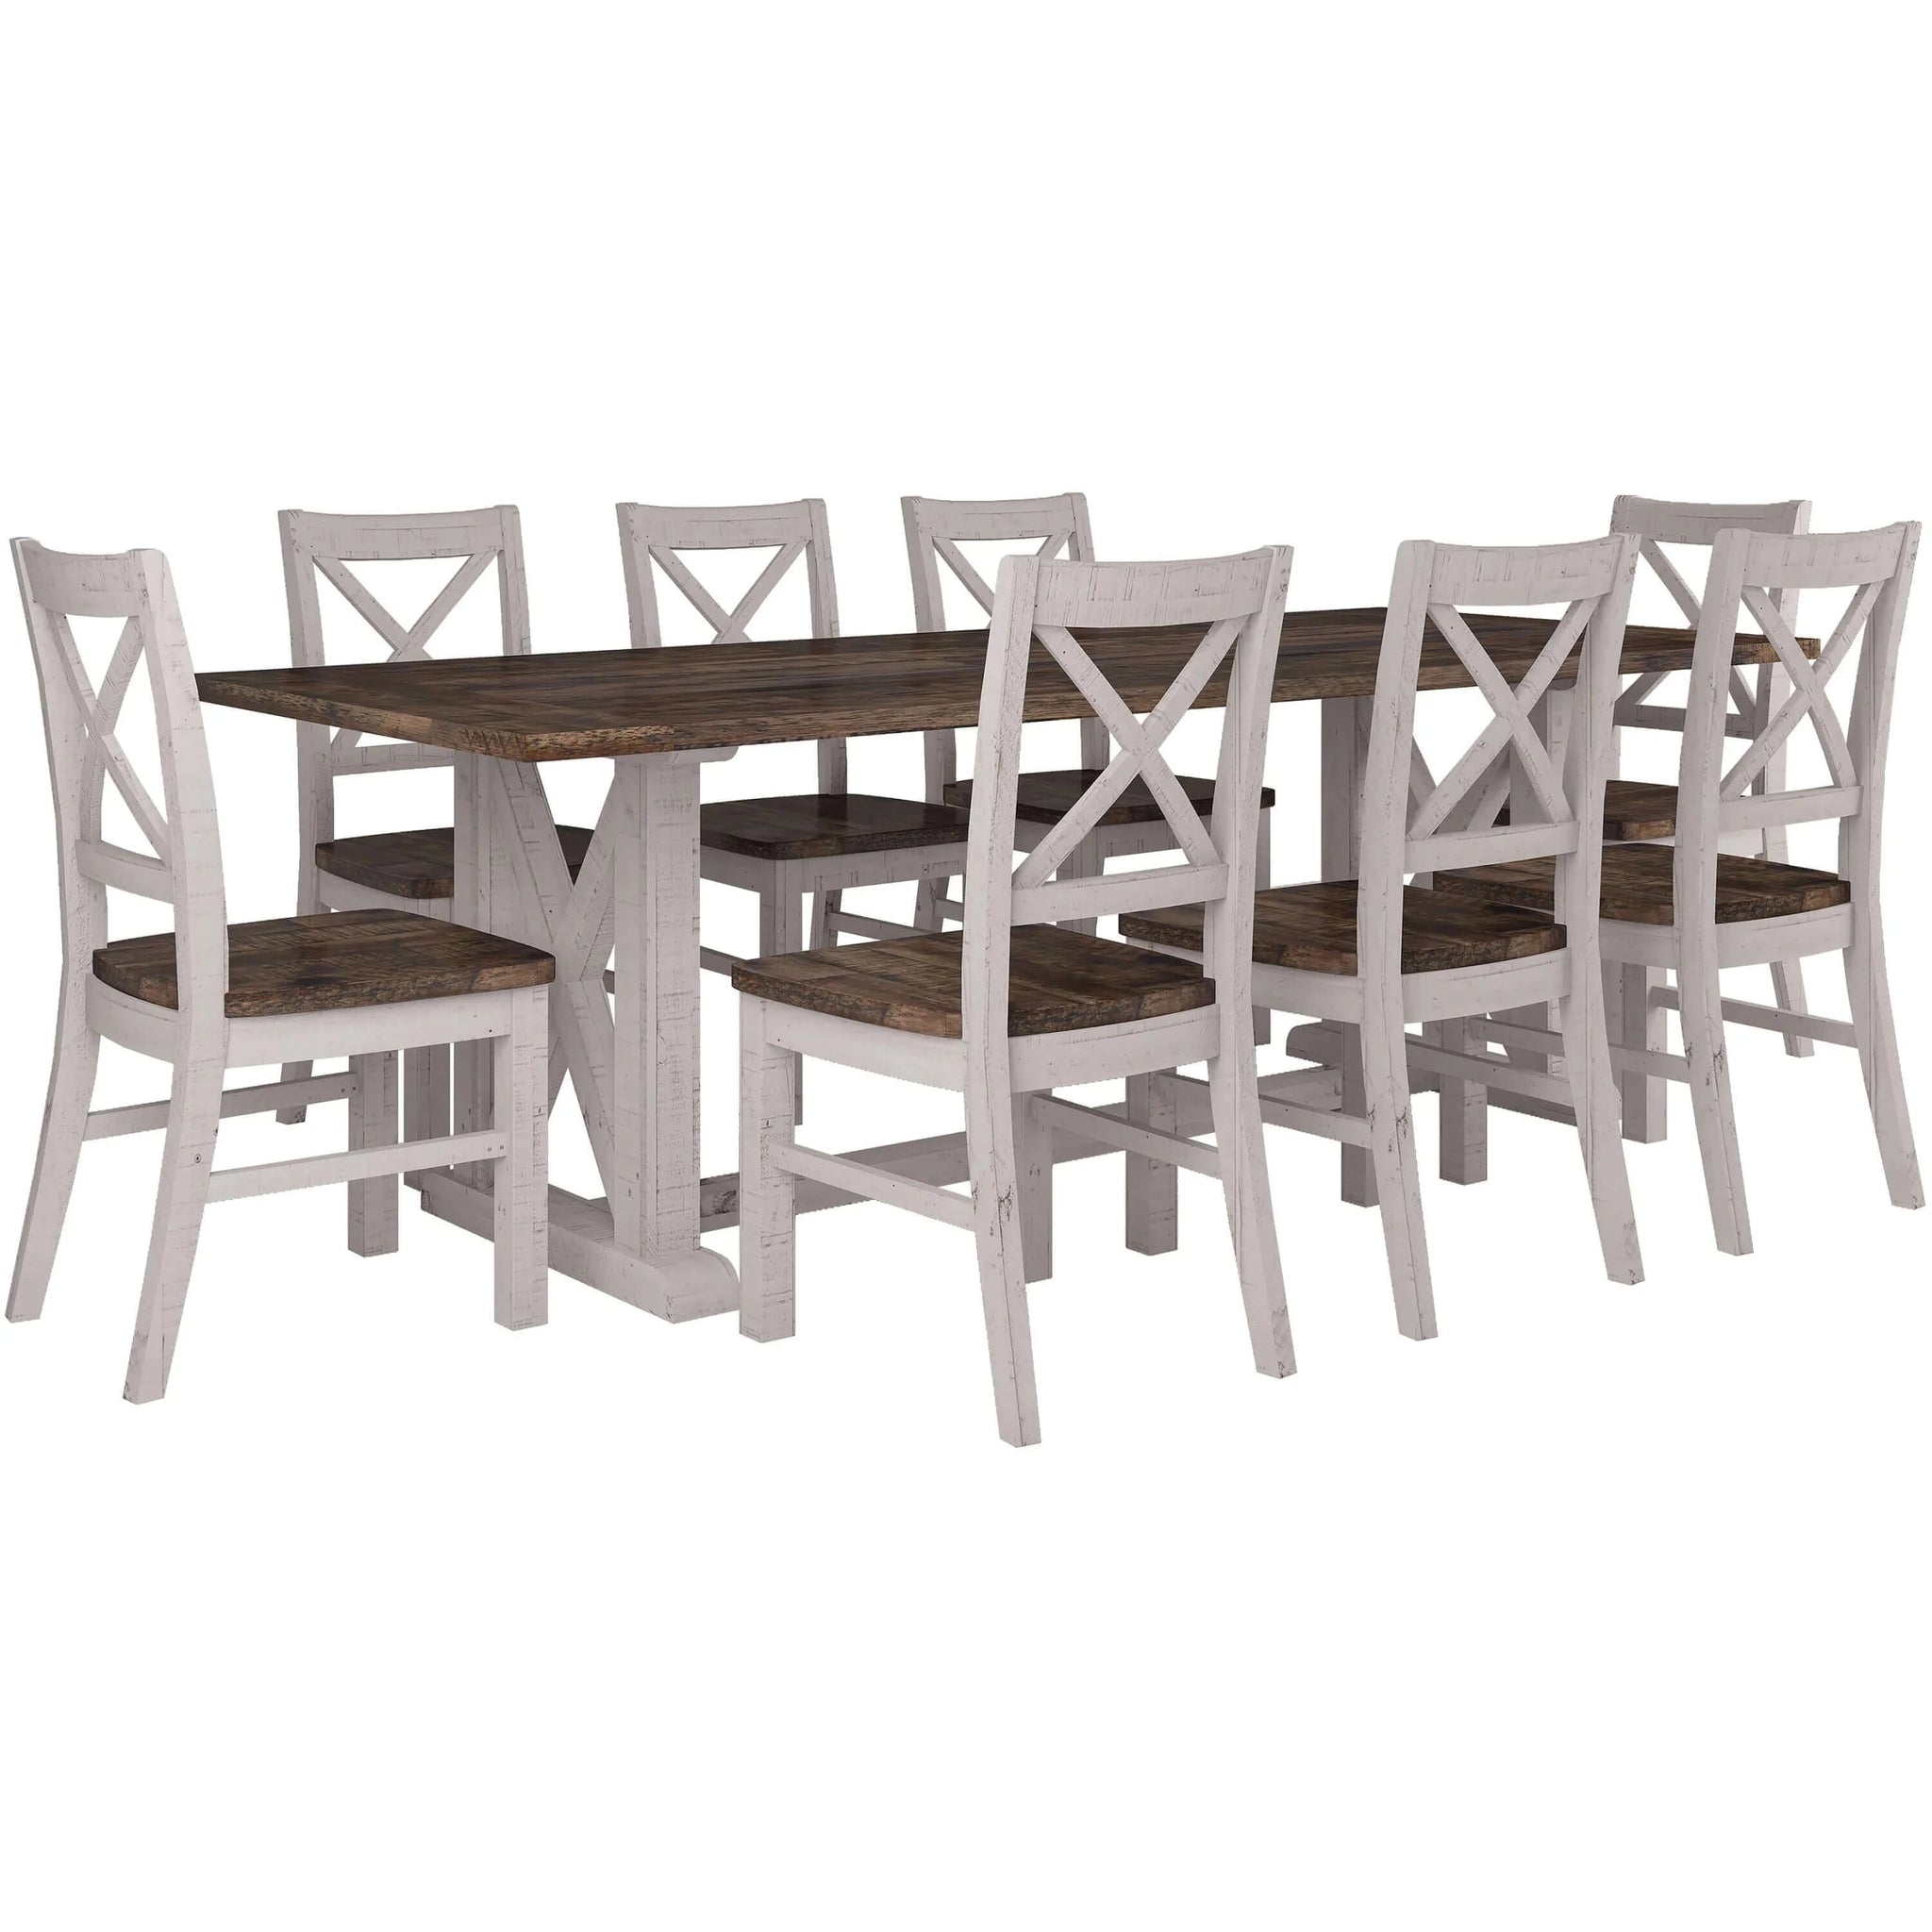 Buy erica 9pc dining set 240cm table 8 chair solid acacia wood timber brown white - upinteriors-Upinteriors